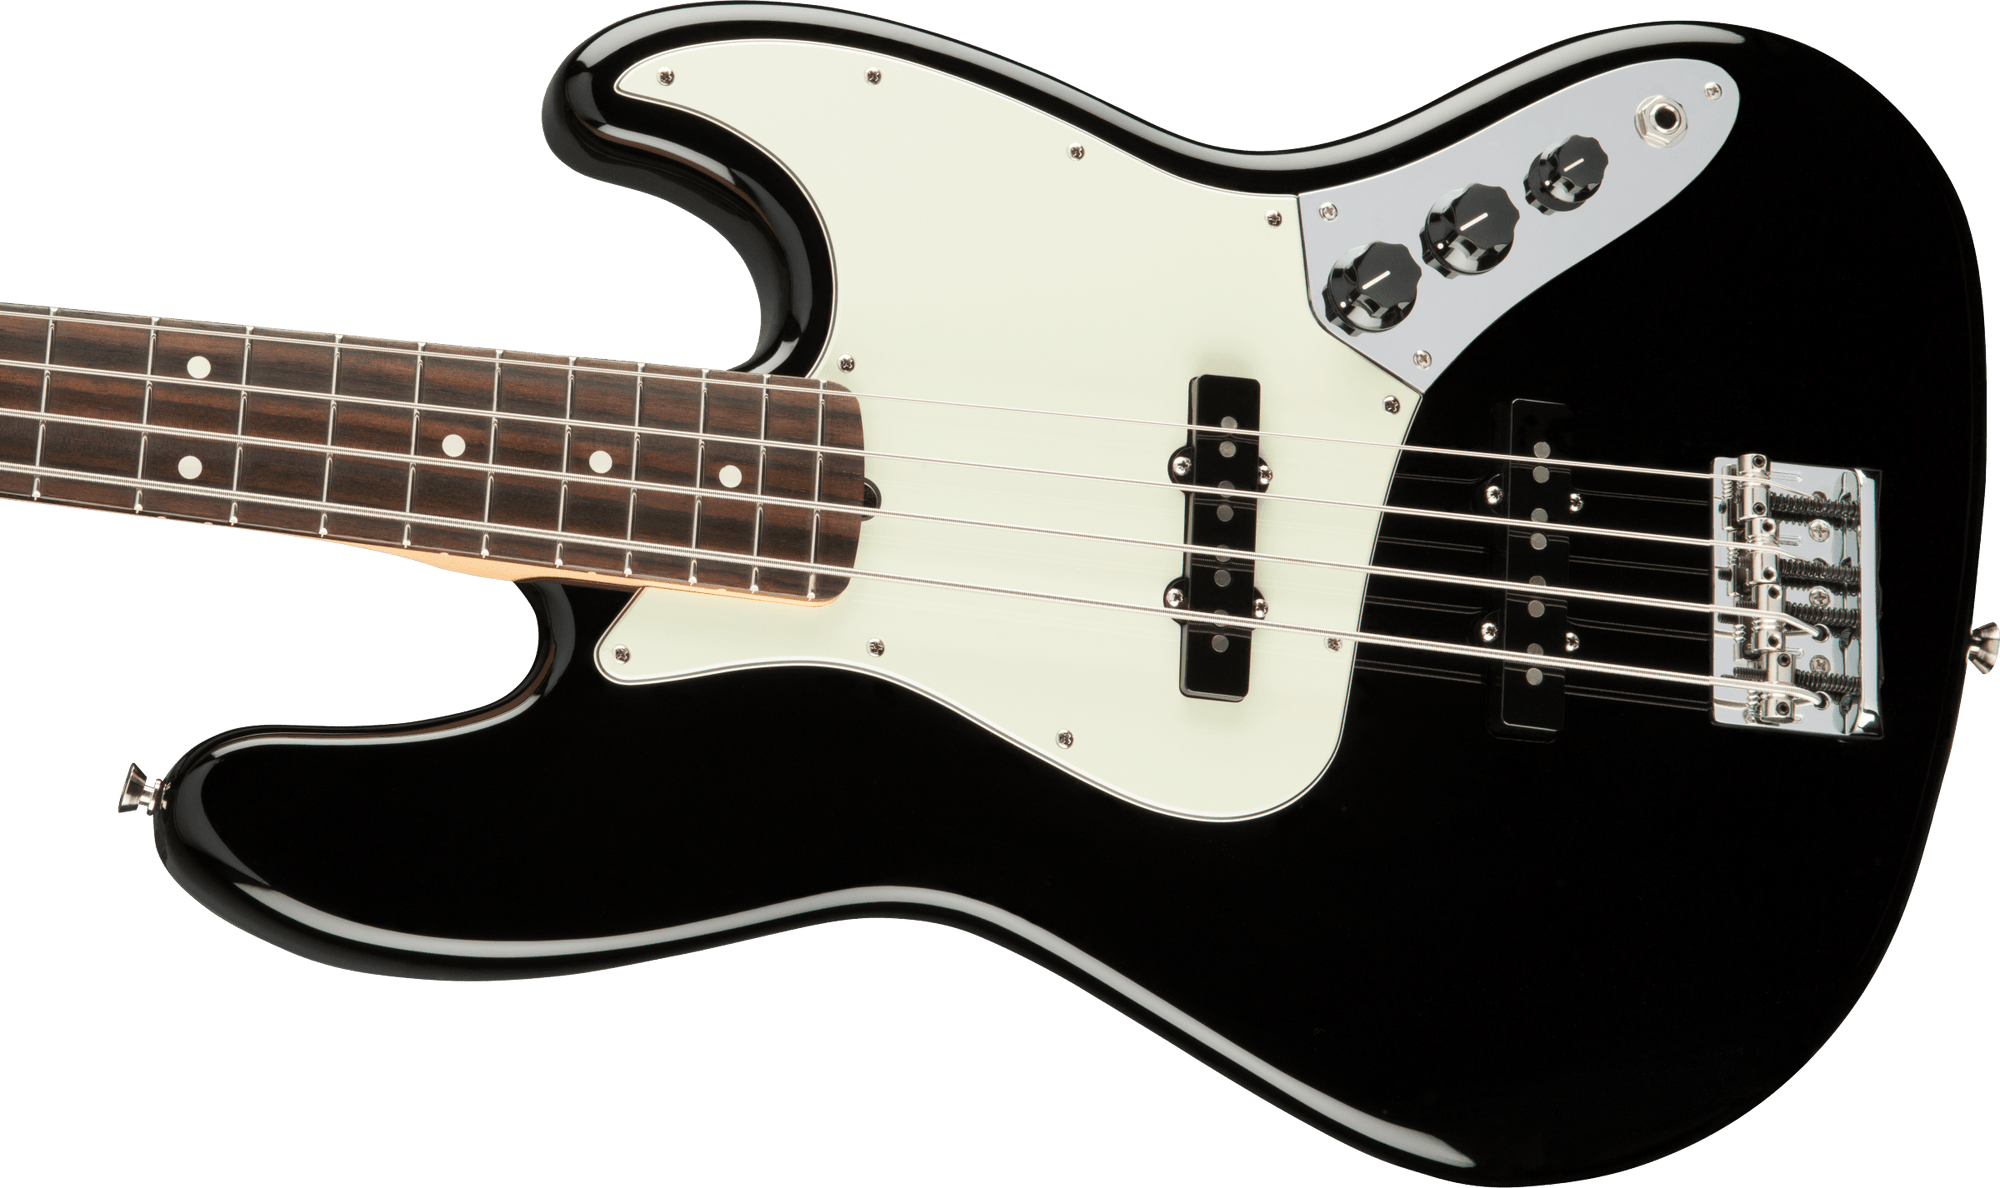 Clearance/Used/Demo American Pro Jazz Bass, Rosewood Fingerboard, Black